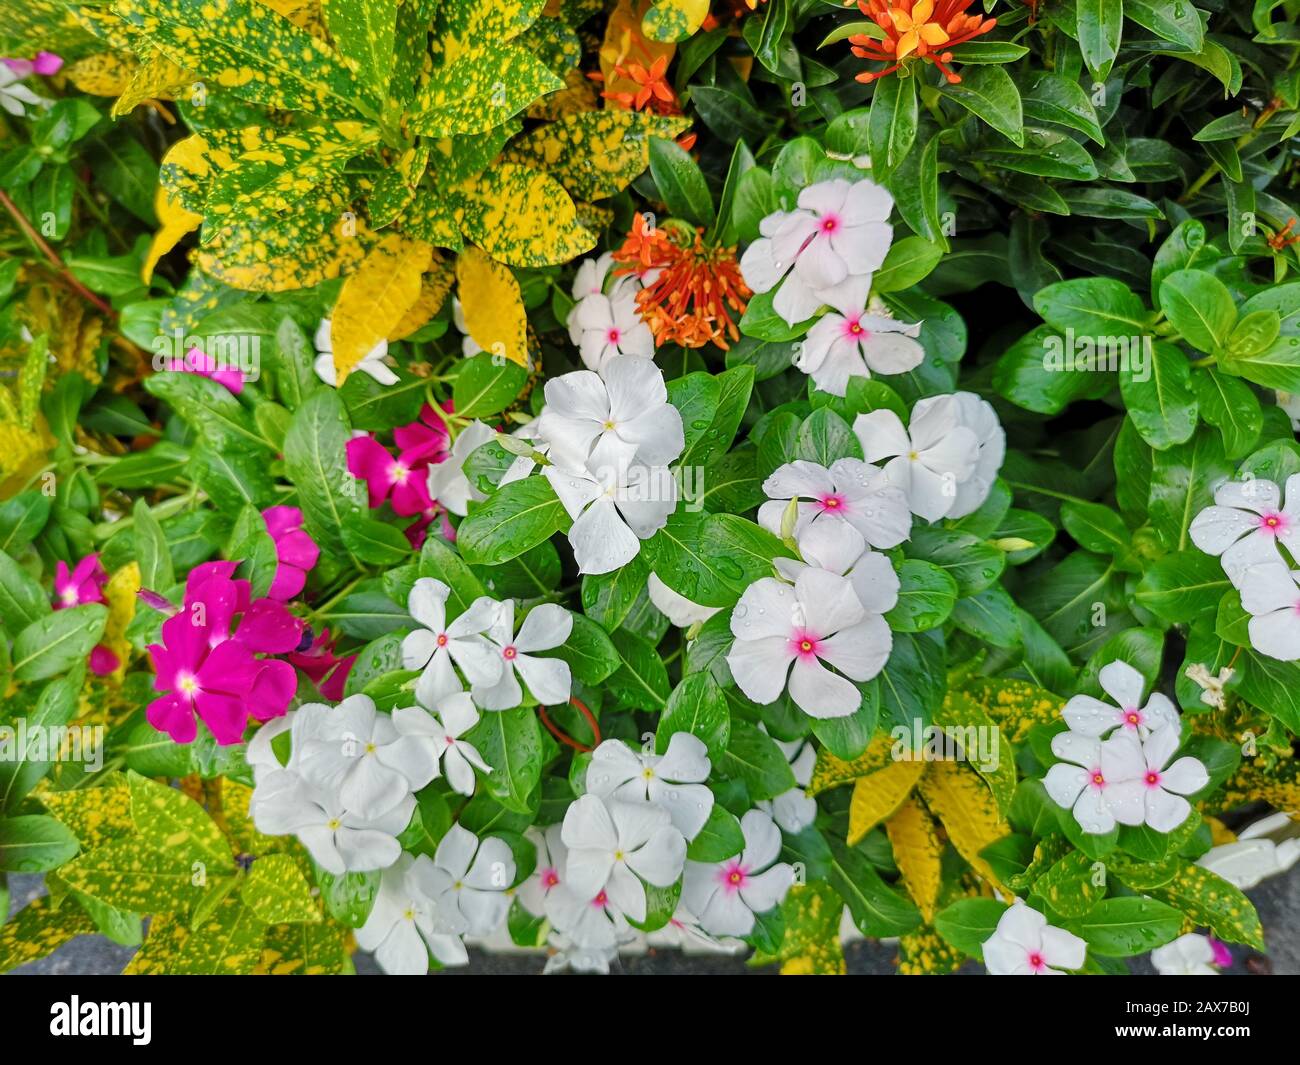 West Indian periwinkle, Bringht eye, Vinca, Cayenne jasmine, Old maid name pink, white, purple color flower in garden Stock Photo